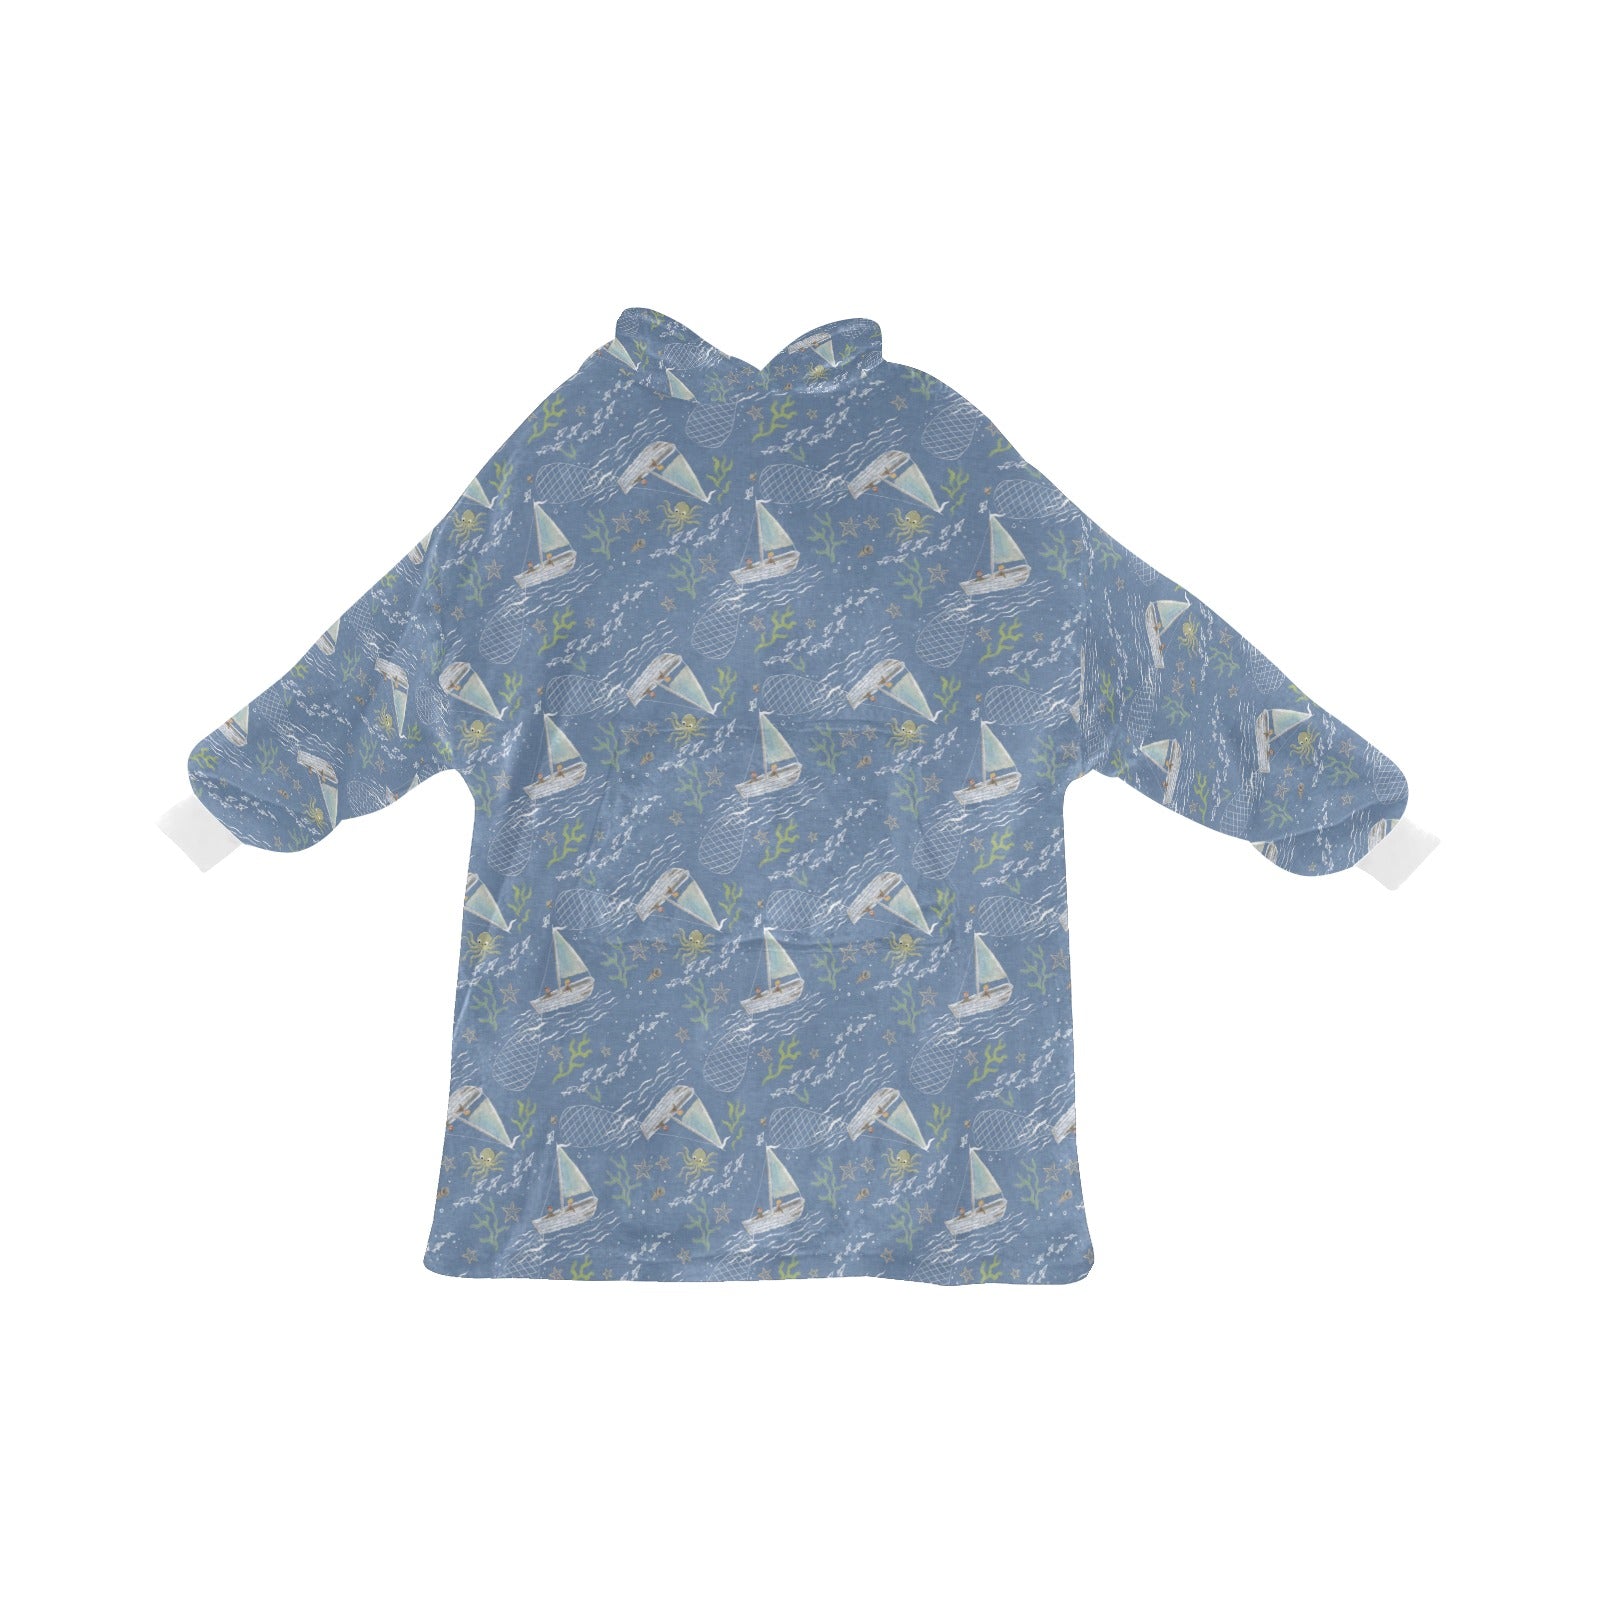 An Oodie-style hooded blanket with a charming blue boats print, designed to keep you warm and stylish on chilly days.